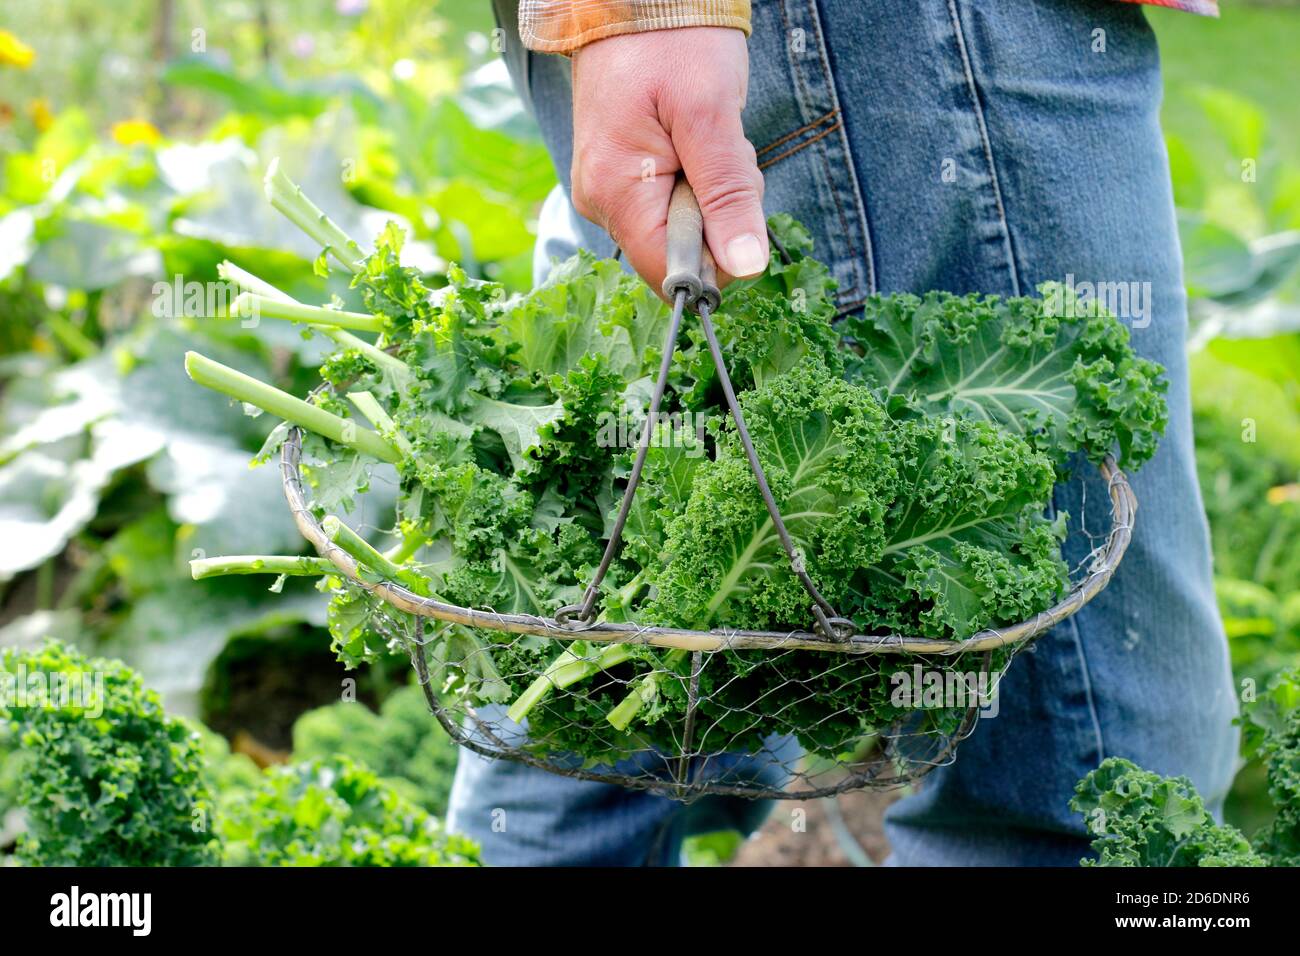 Brassica oleracea 'Dwarf Green Curled'. Freshly picked curly kale grown in the domestic vegetable plot pictured. UK Stock Photo